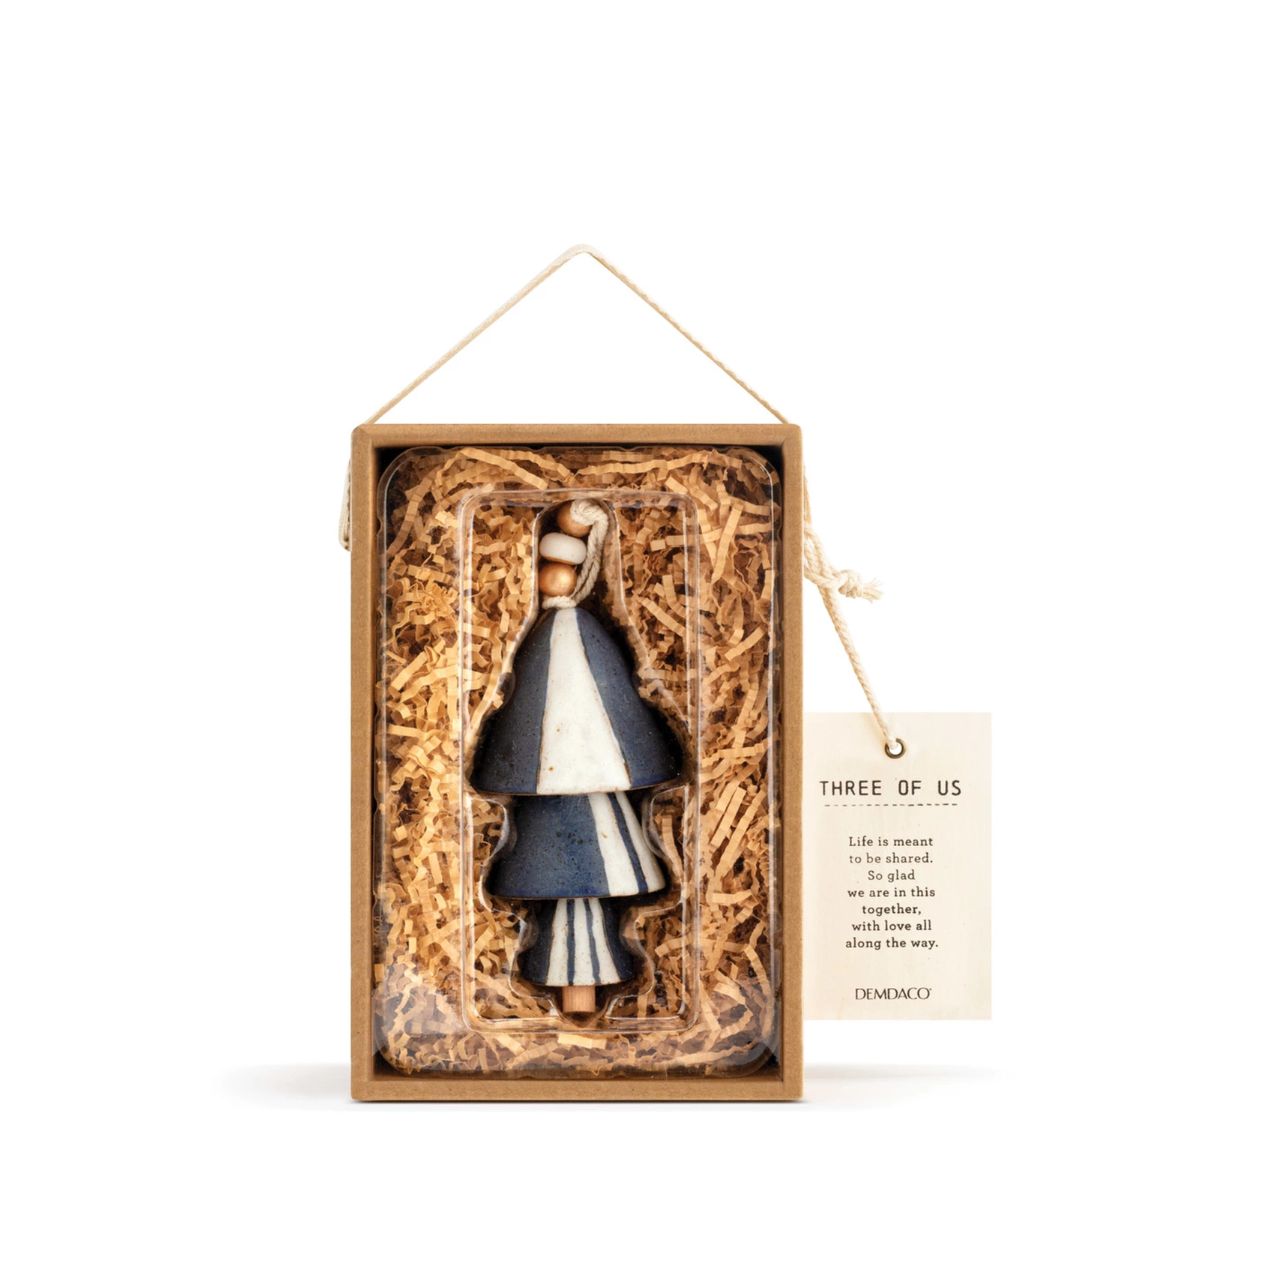 The Inspired Bell Three of Us are beautifully handcrafted bells that make the perfect gift for a friend or loved one. The natural aesthetic and light color pallet is perfect for any home. Bring some inspiration into your own home or gift it to a loved one.